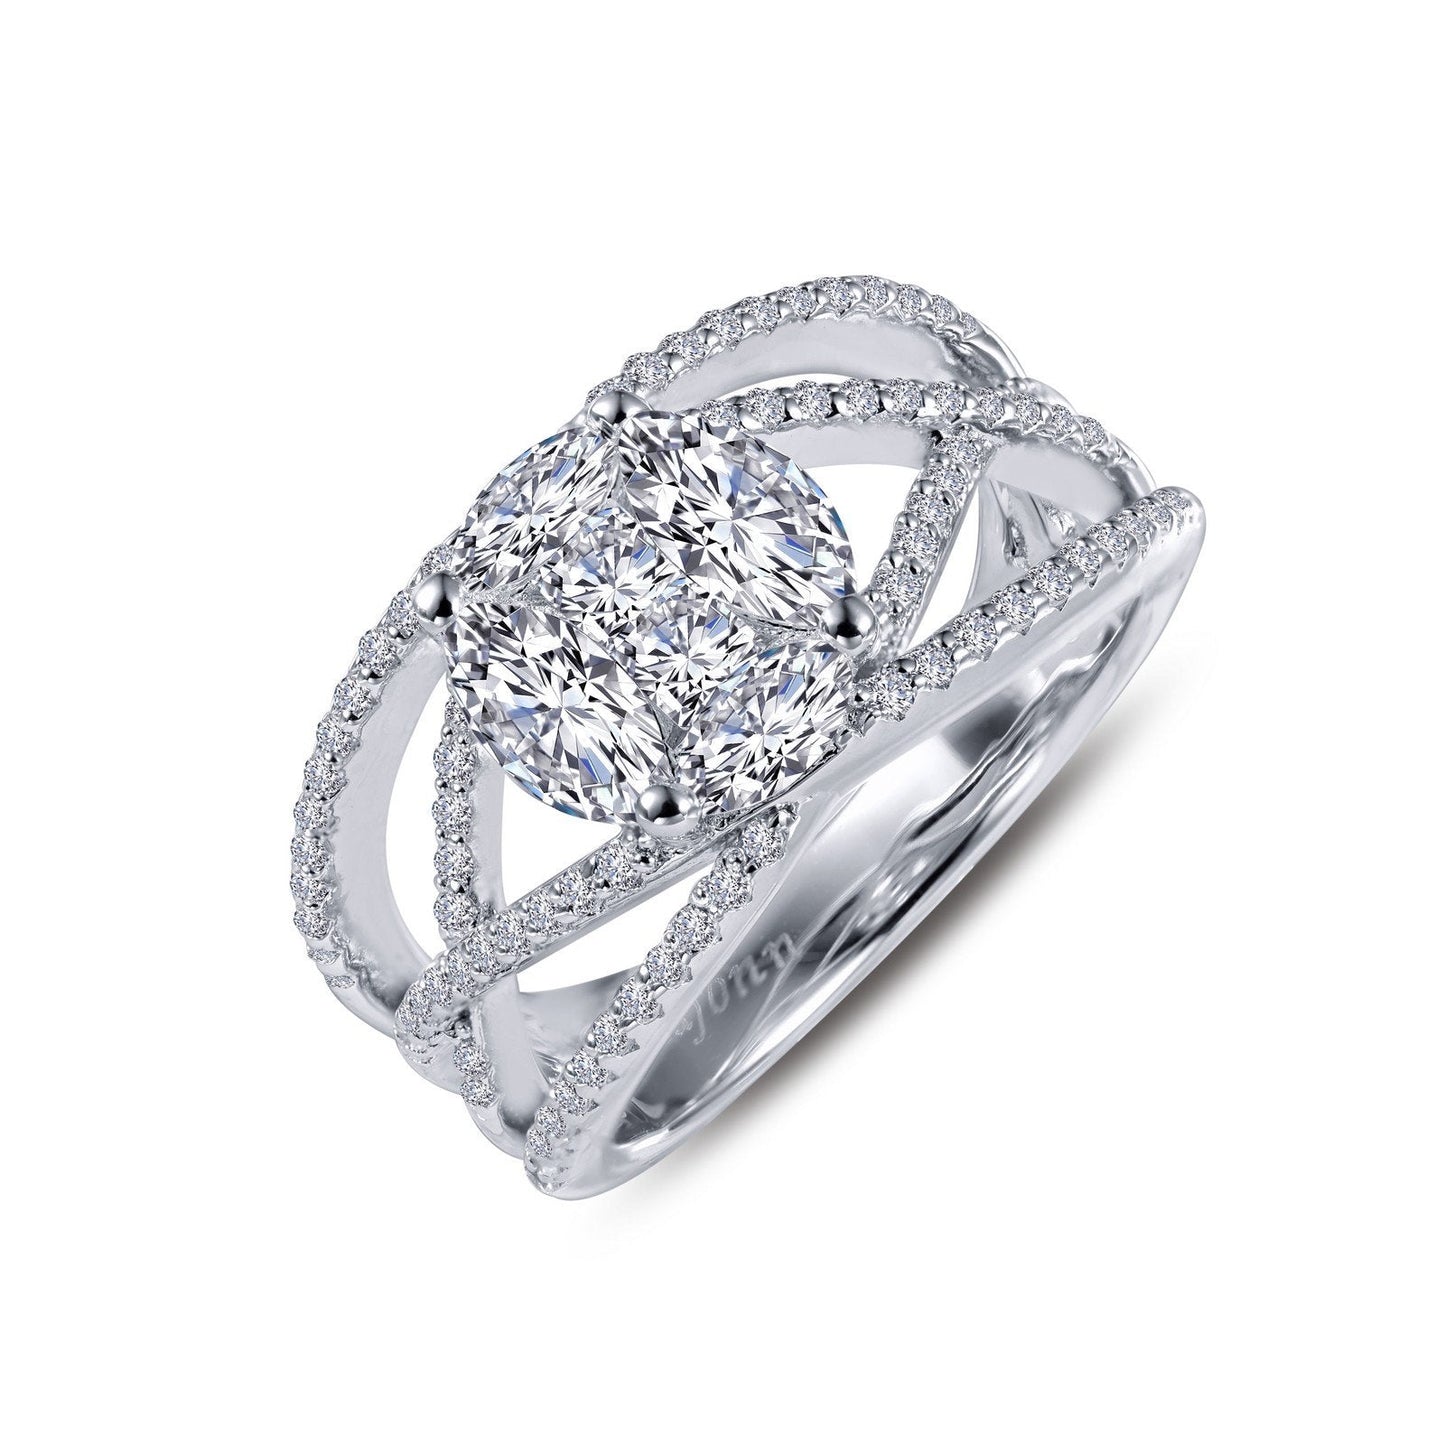 Load image into Gallery viewer, LaFonn Platinum Simulated Diamond  7x3.5mmX2 5x2.5mmX2 Marquise,2.5mmX2 Square, Approx. 1.40 CTW RINGS 2.24 CTW Anniversary Band
